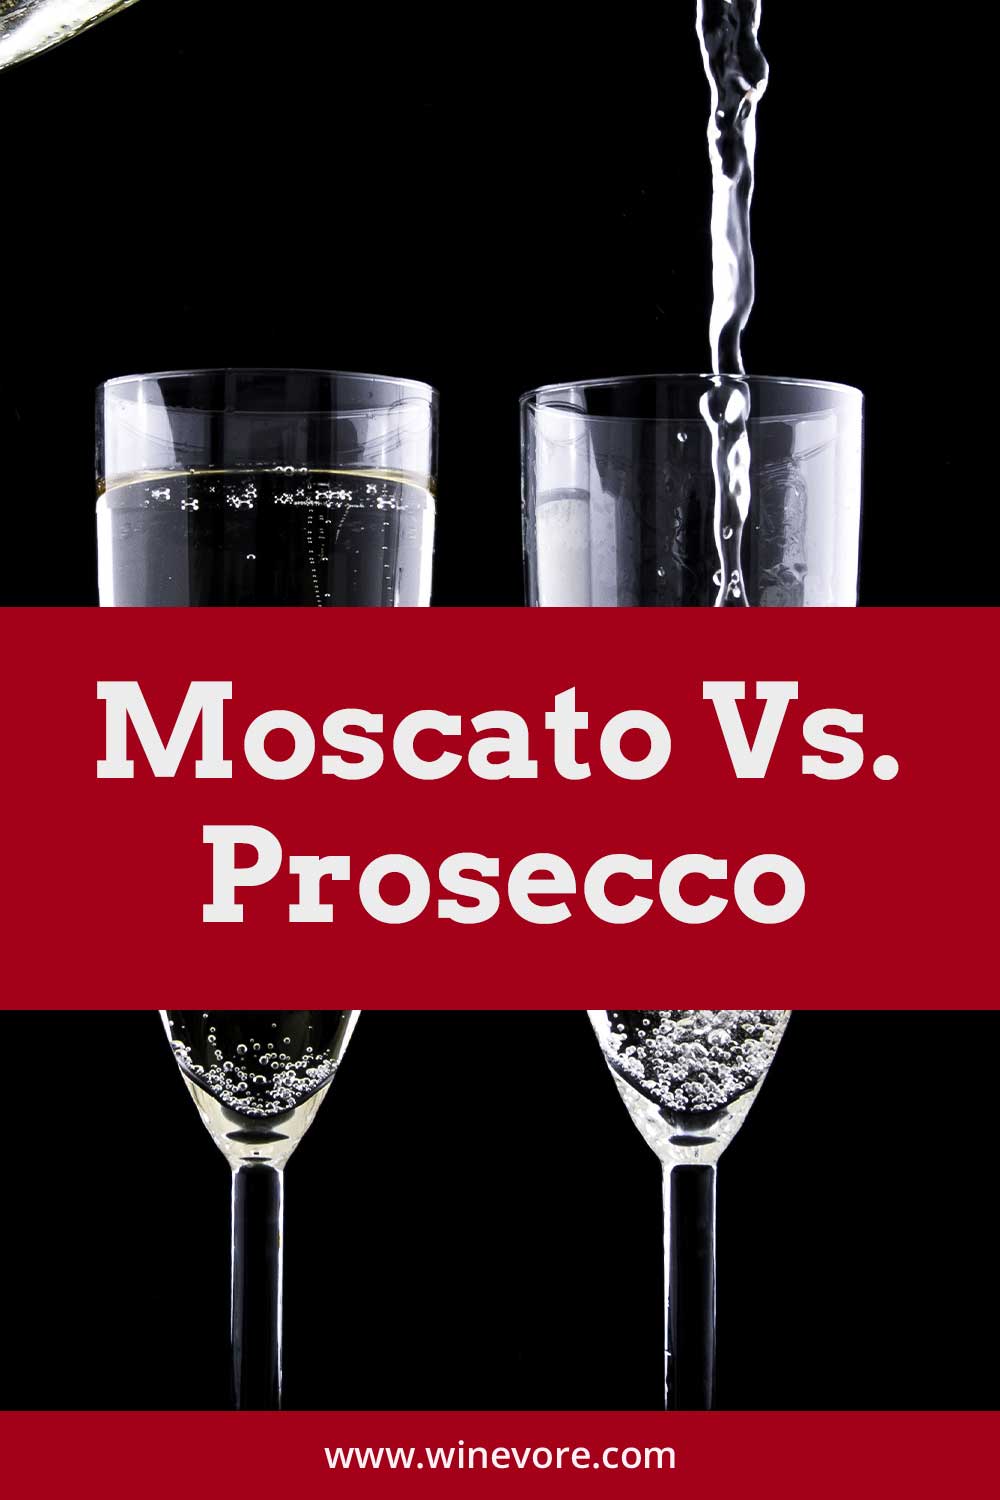 Two wine glasses together and wine being poured into one of them - Moscato Vs. Prosecco